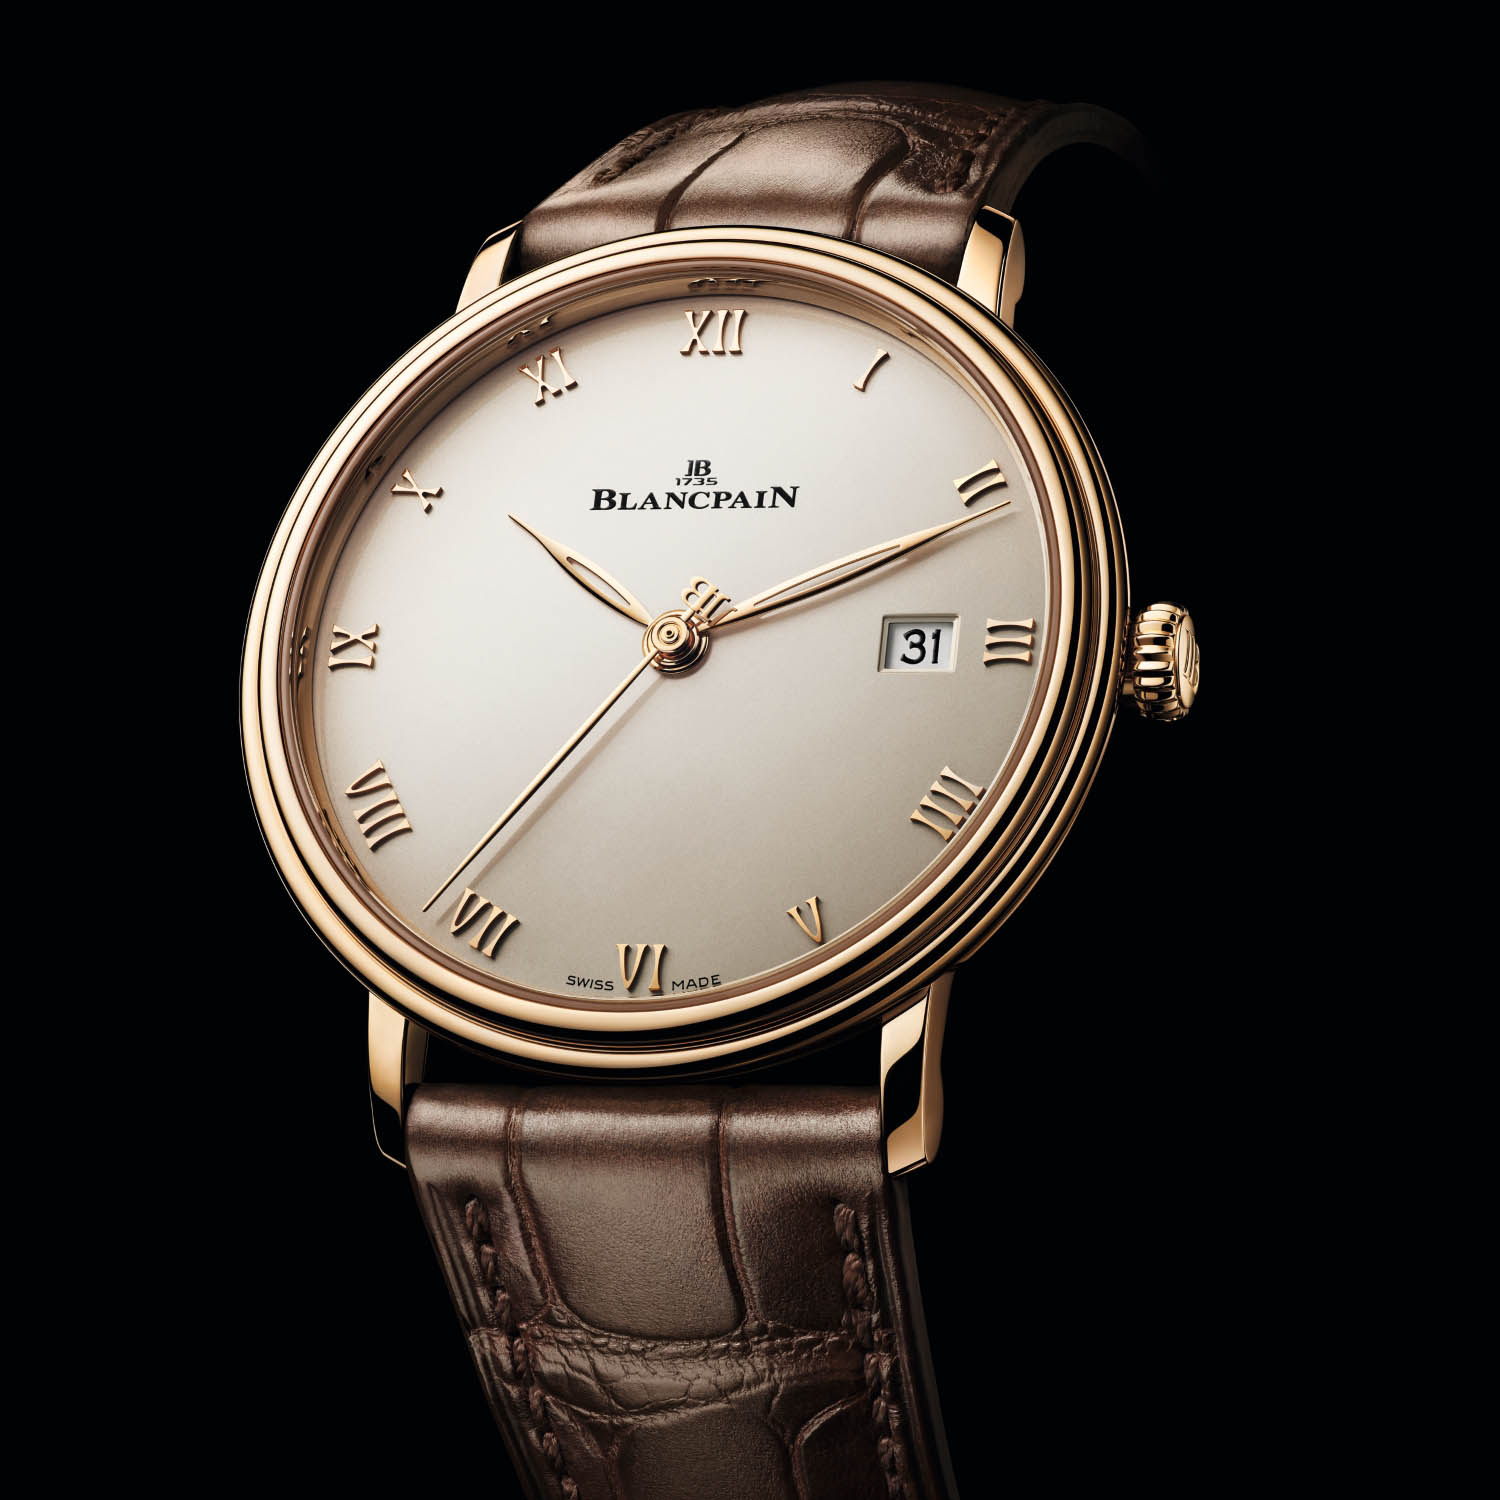 zaad Dalset poeder Introducing The 2020 Blancpain Villeret Ultraplate 6224 (Specs & Price)